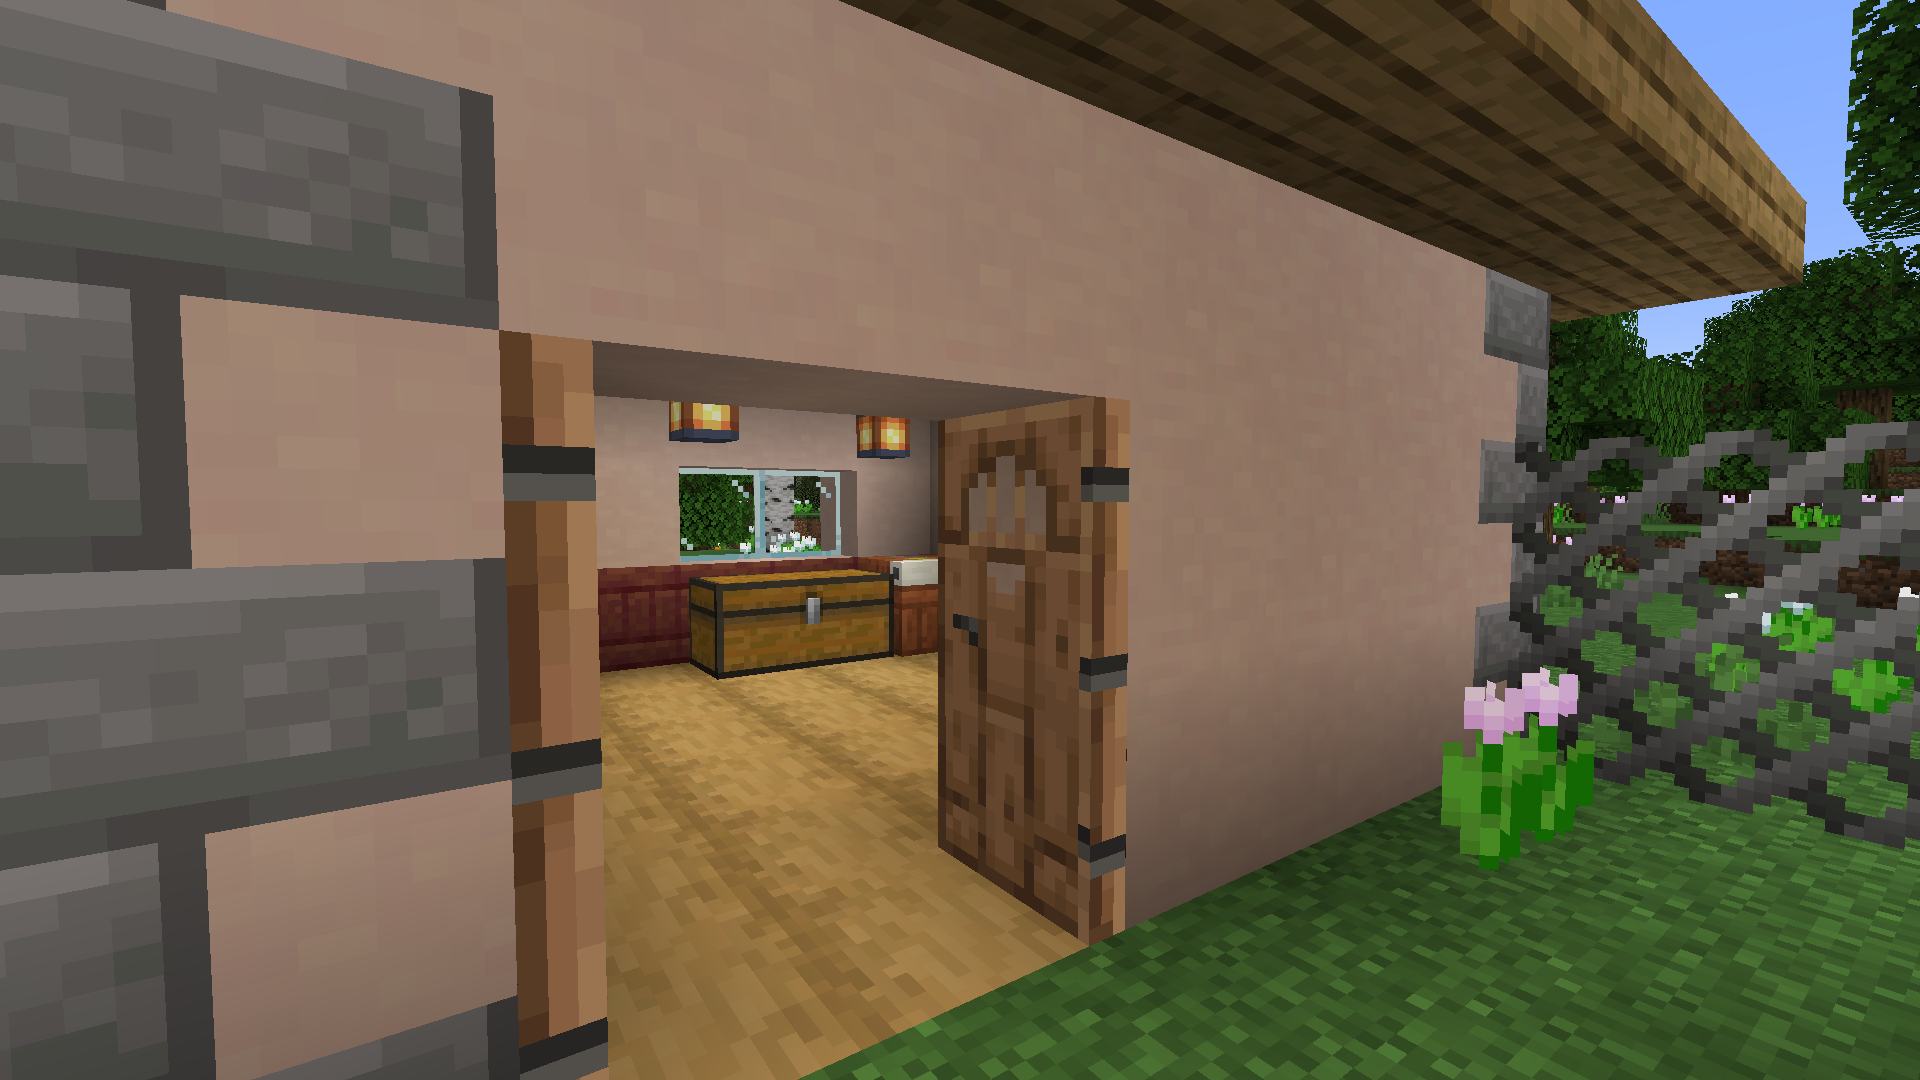 House with trims, quoins, decomod doors, a wallpapering table, and a chain-link fence